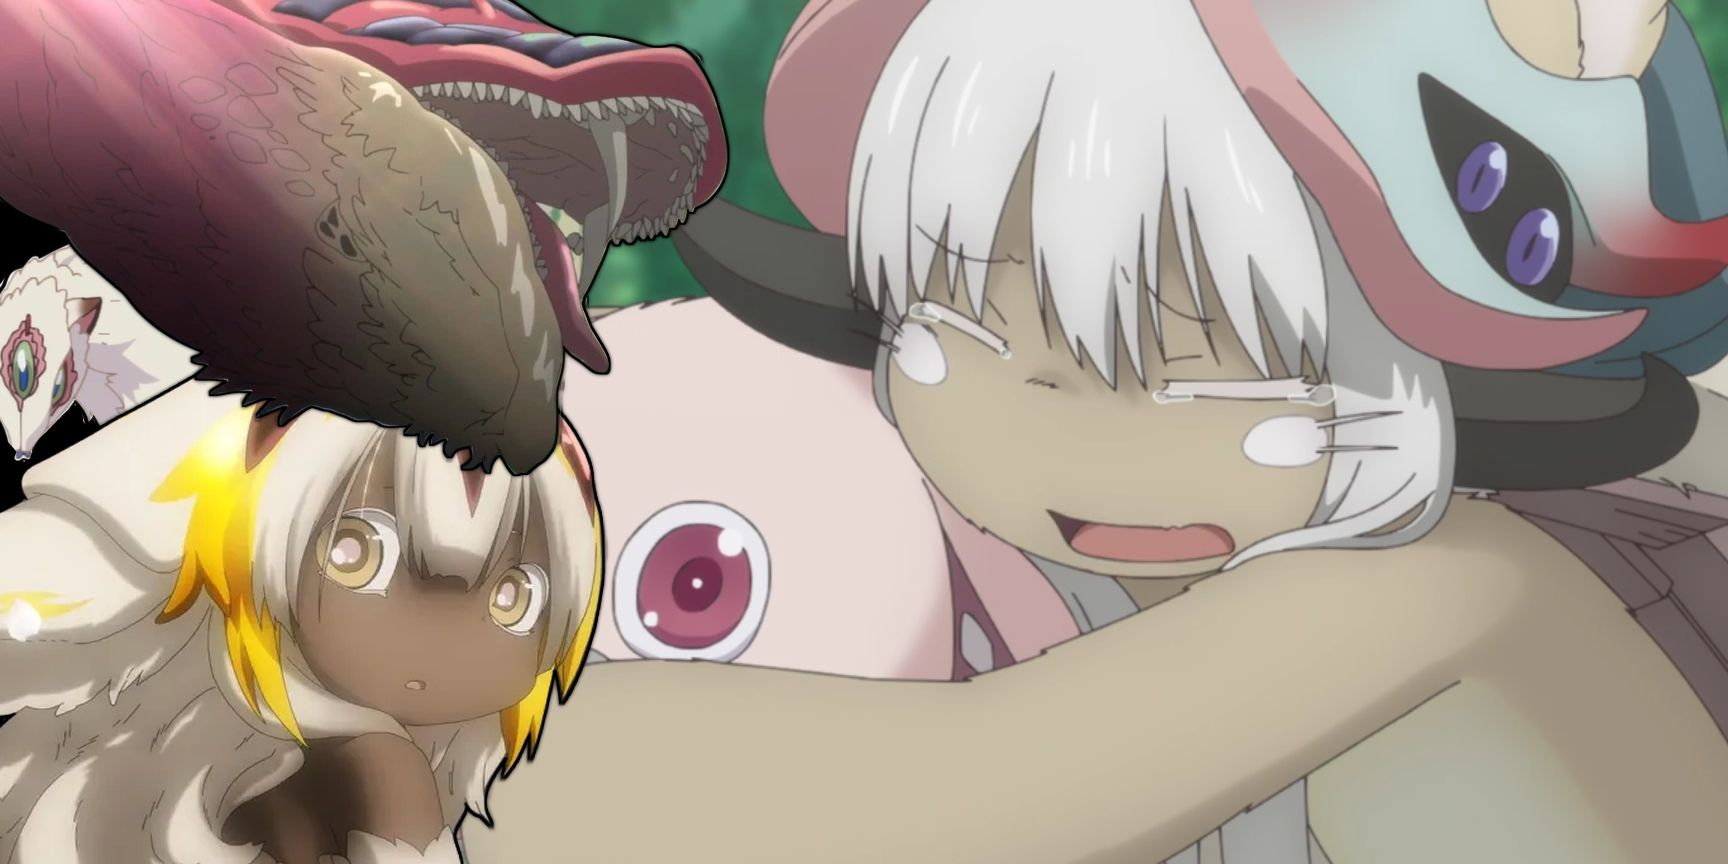 Made in Abyss Faputa Mitty Nanachi with Splitjaw and Corpse Weeper Monsters